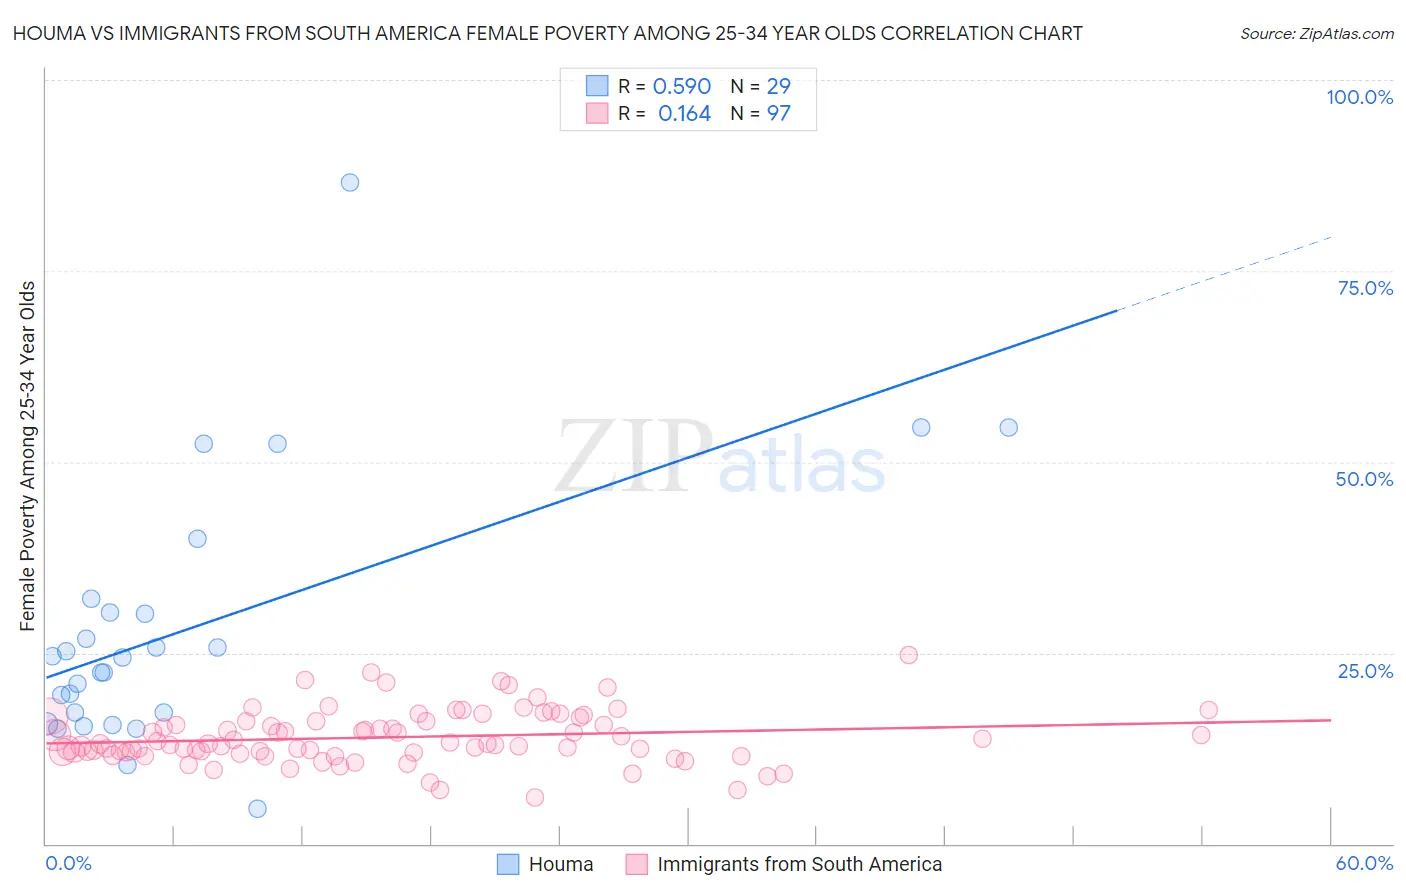 Houma vs Immigrants from South America Female Poverty Among 25-34 Year Olds